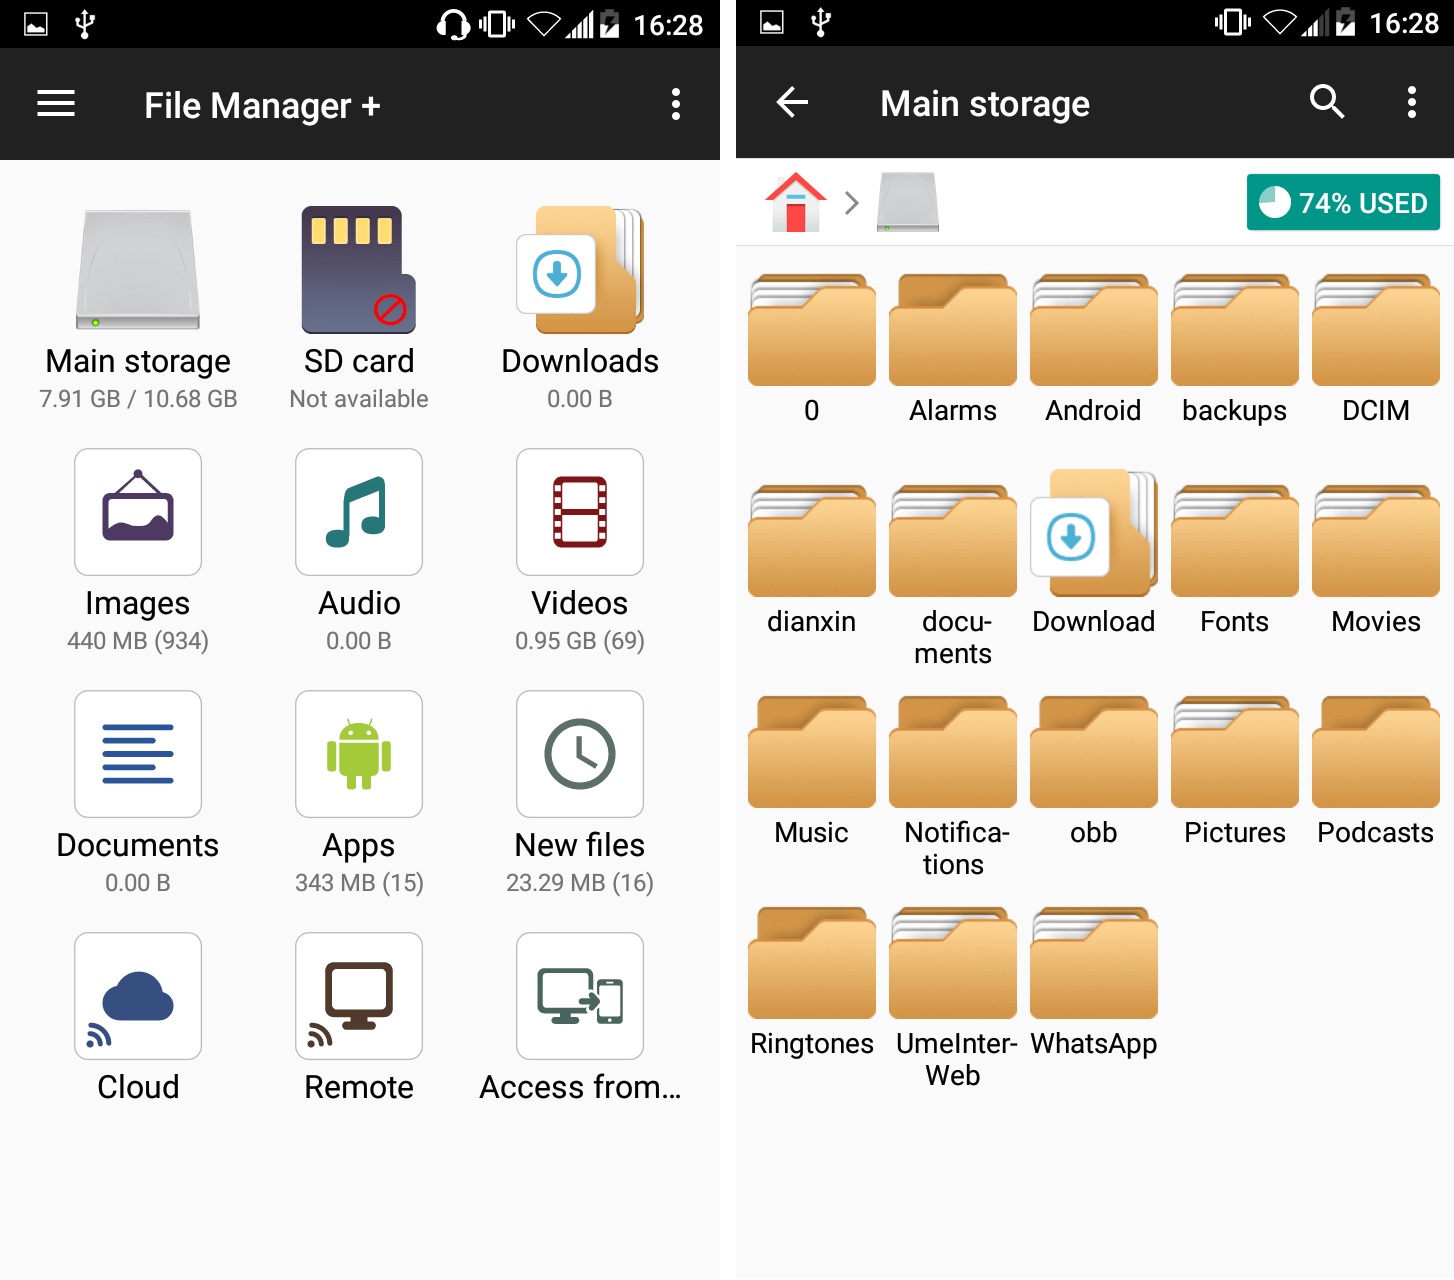 User interface of File Manager+